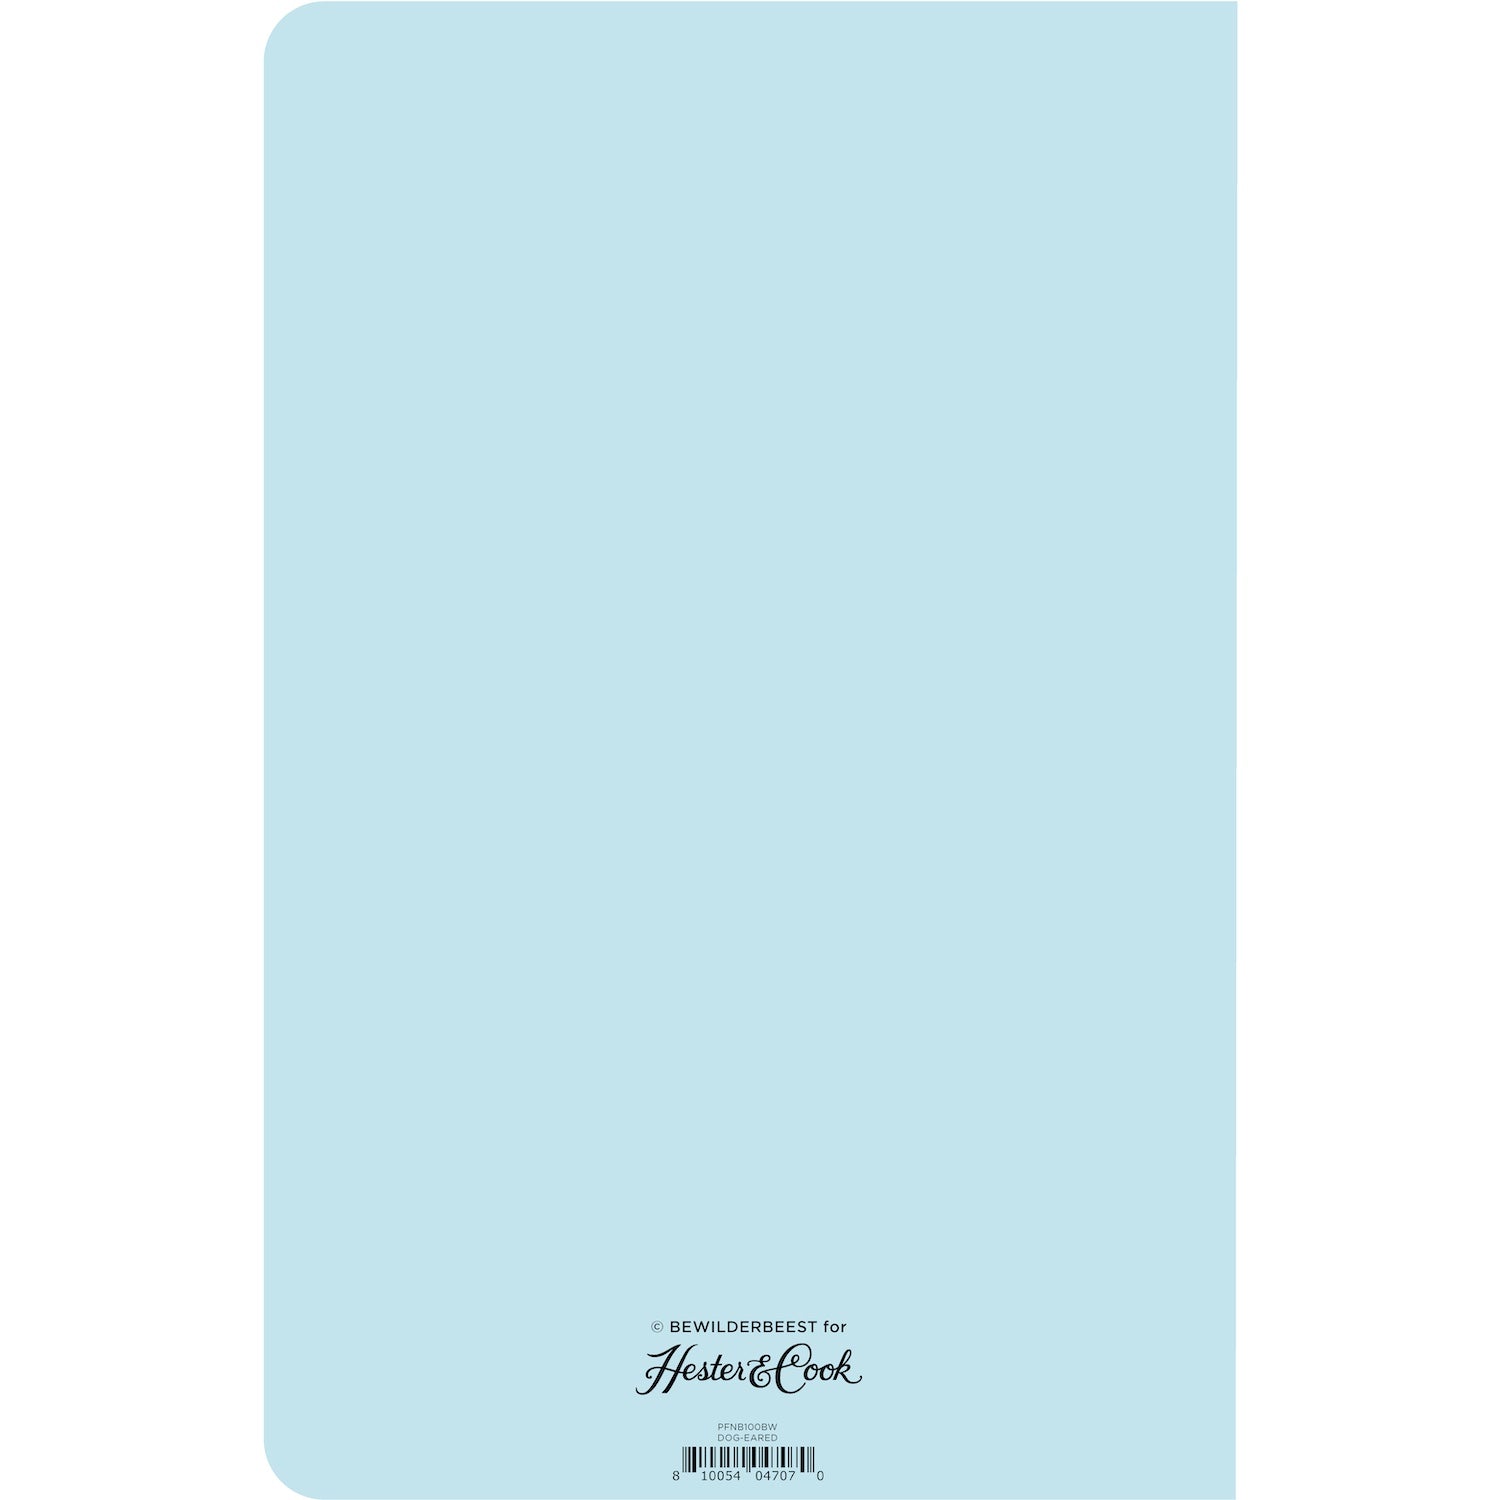 The back cover of the Dog-Eared Notebook is solid baby blue with the Hester &amp; Cook logo printed at the bottom.